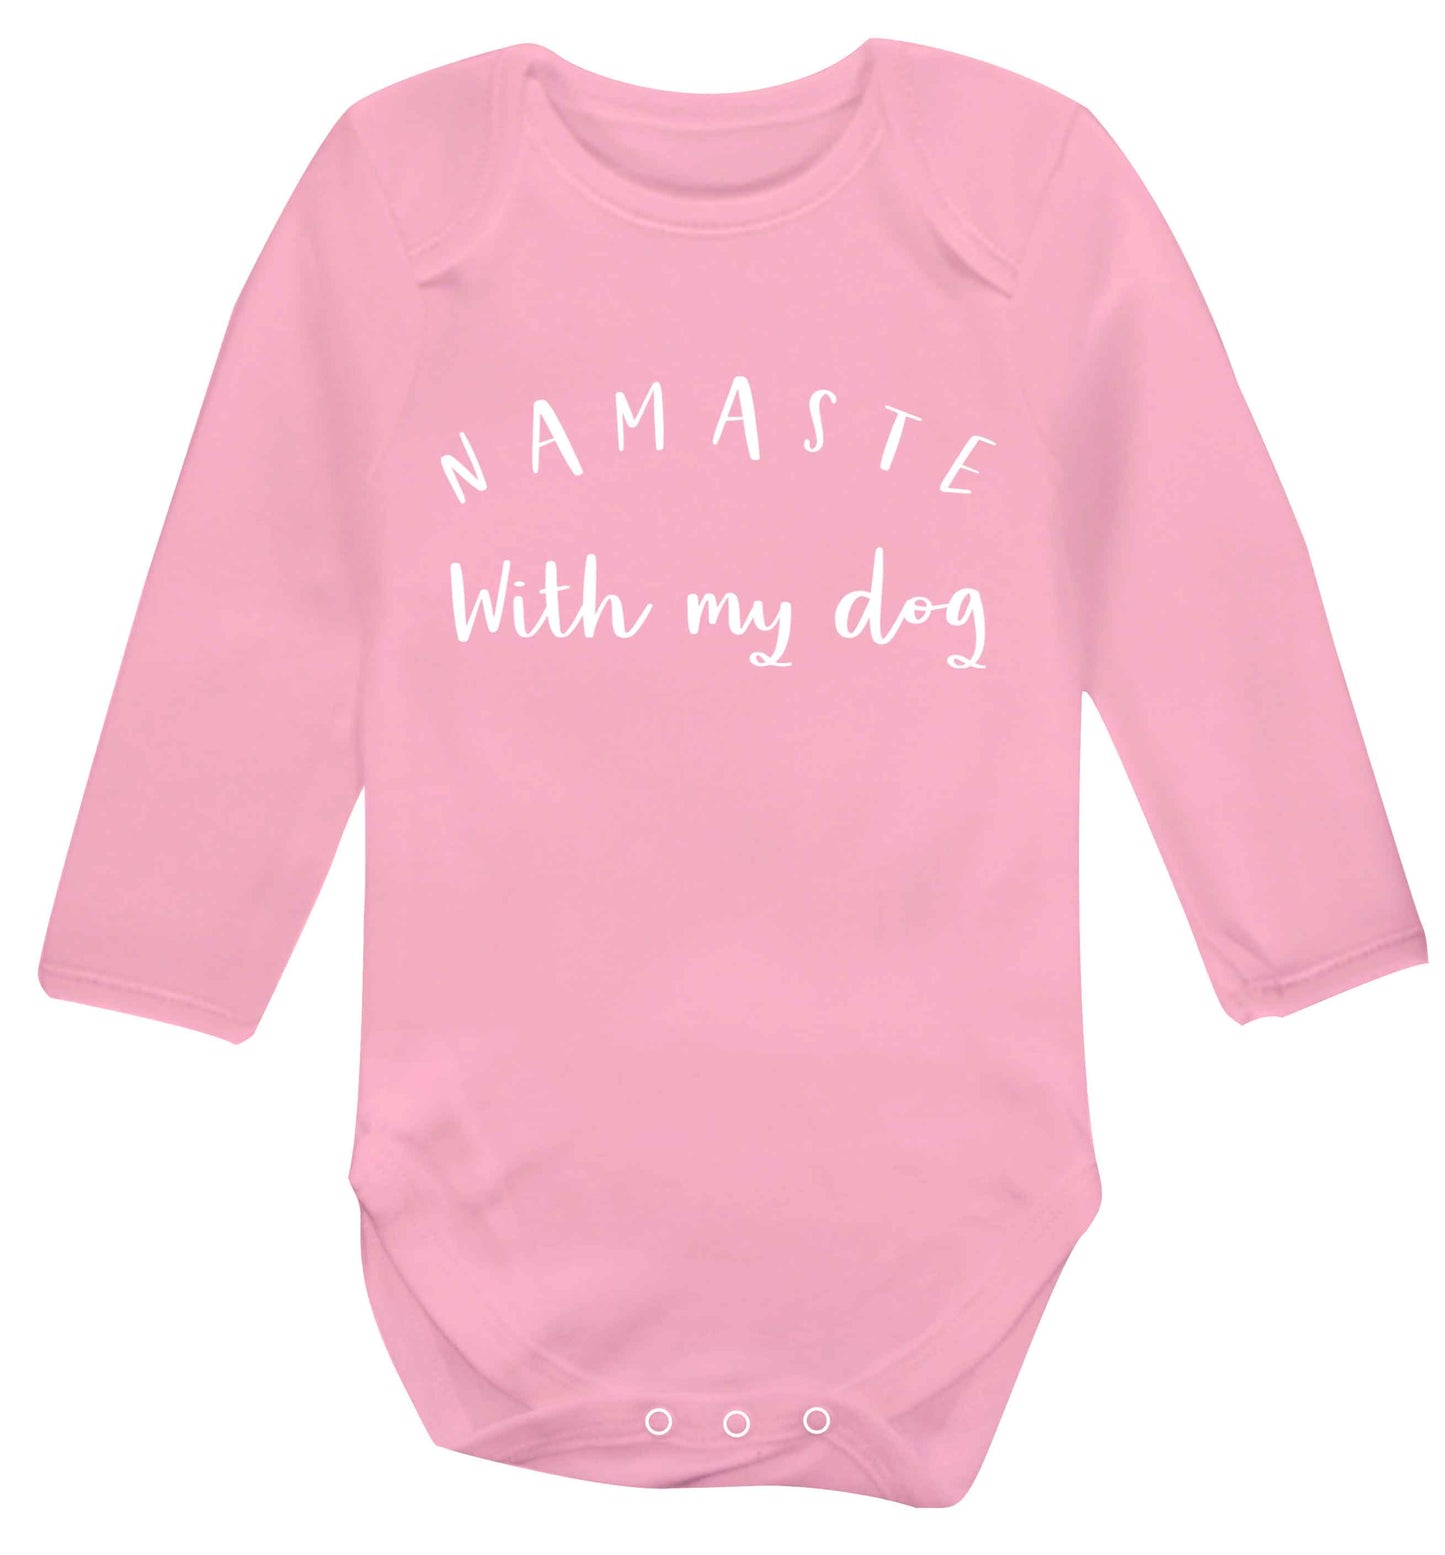 Namaste with my dog Baby Vest long sleeved pale pink 6-12 months